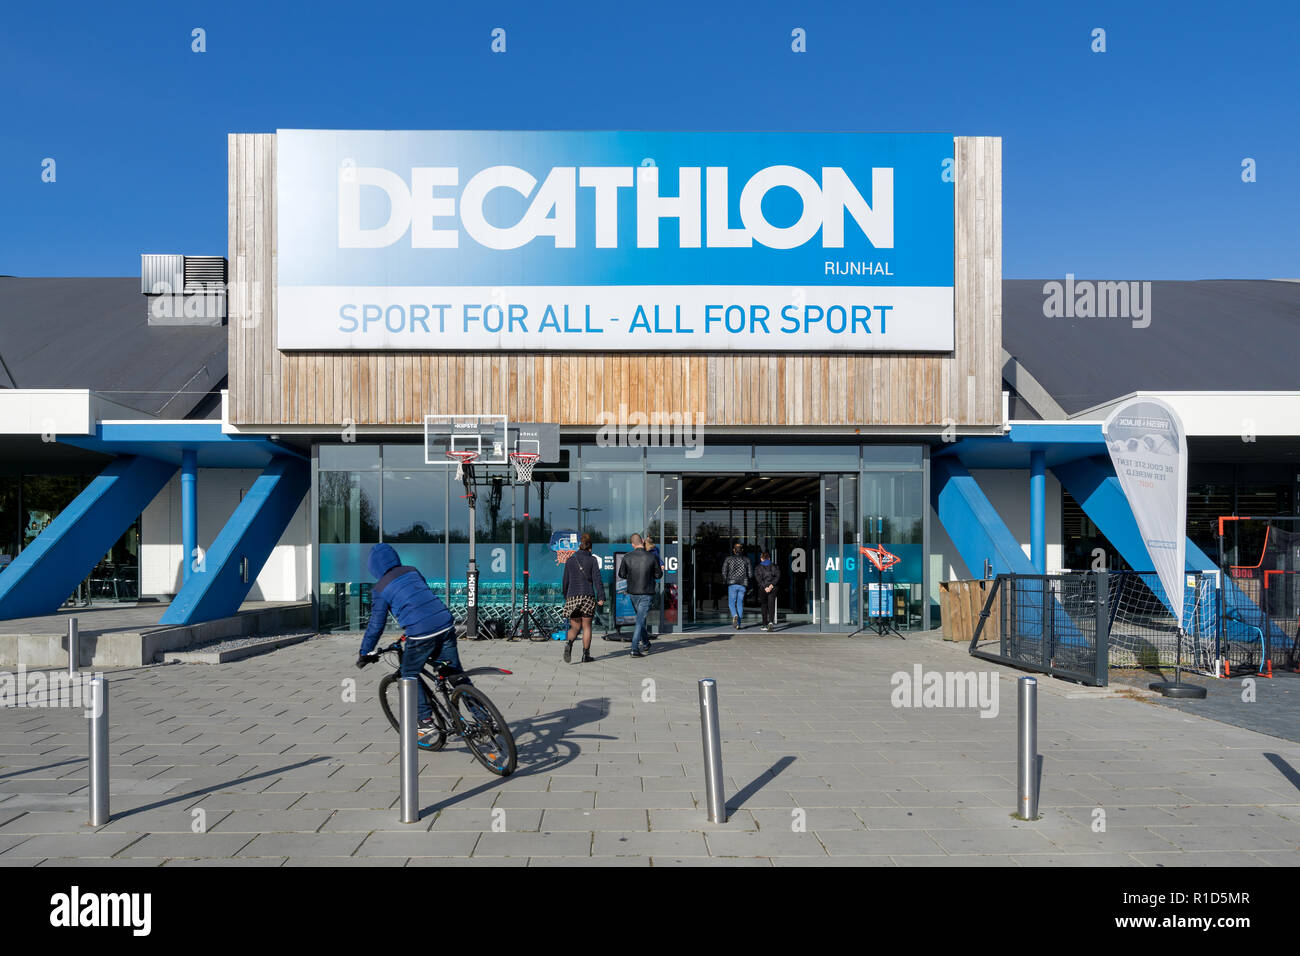 Exterior View Of Decathlon Sporting Goods Flagship Store Close To San  Francisco California Stock Photo - Download Image Now - iStock